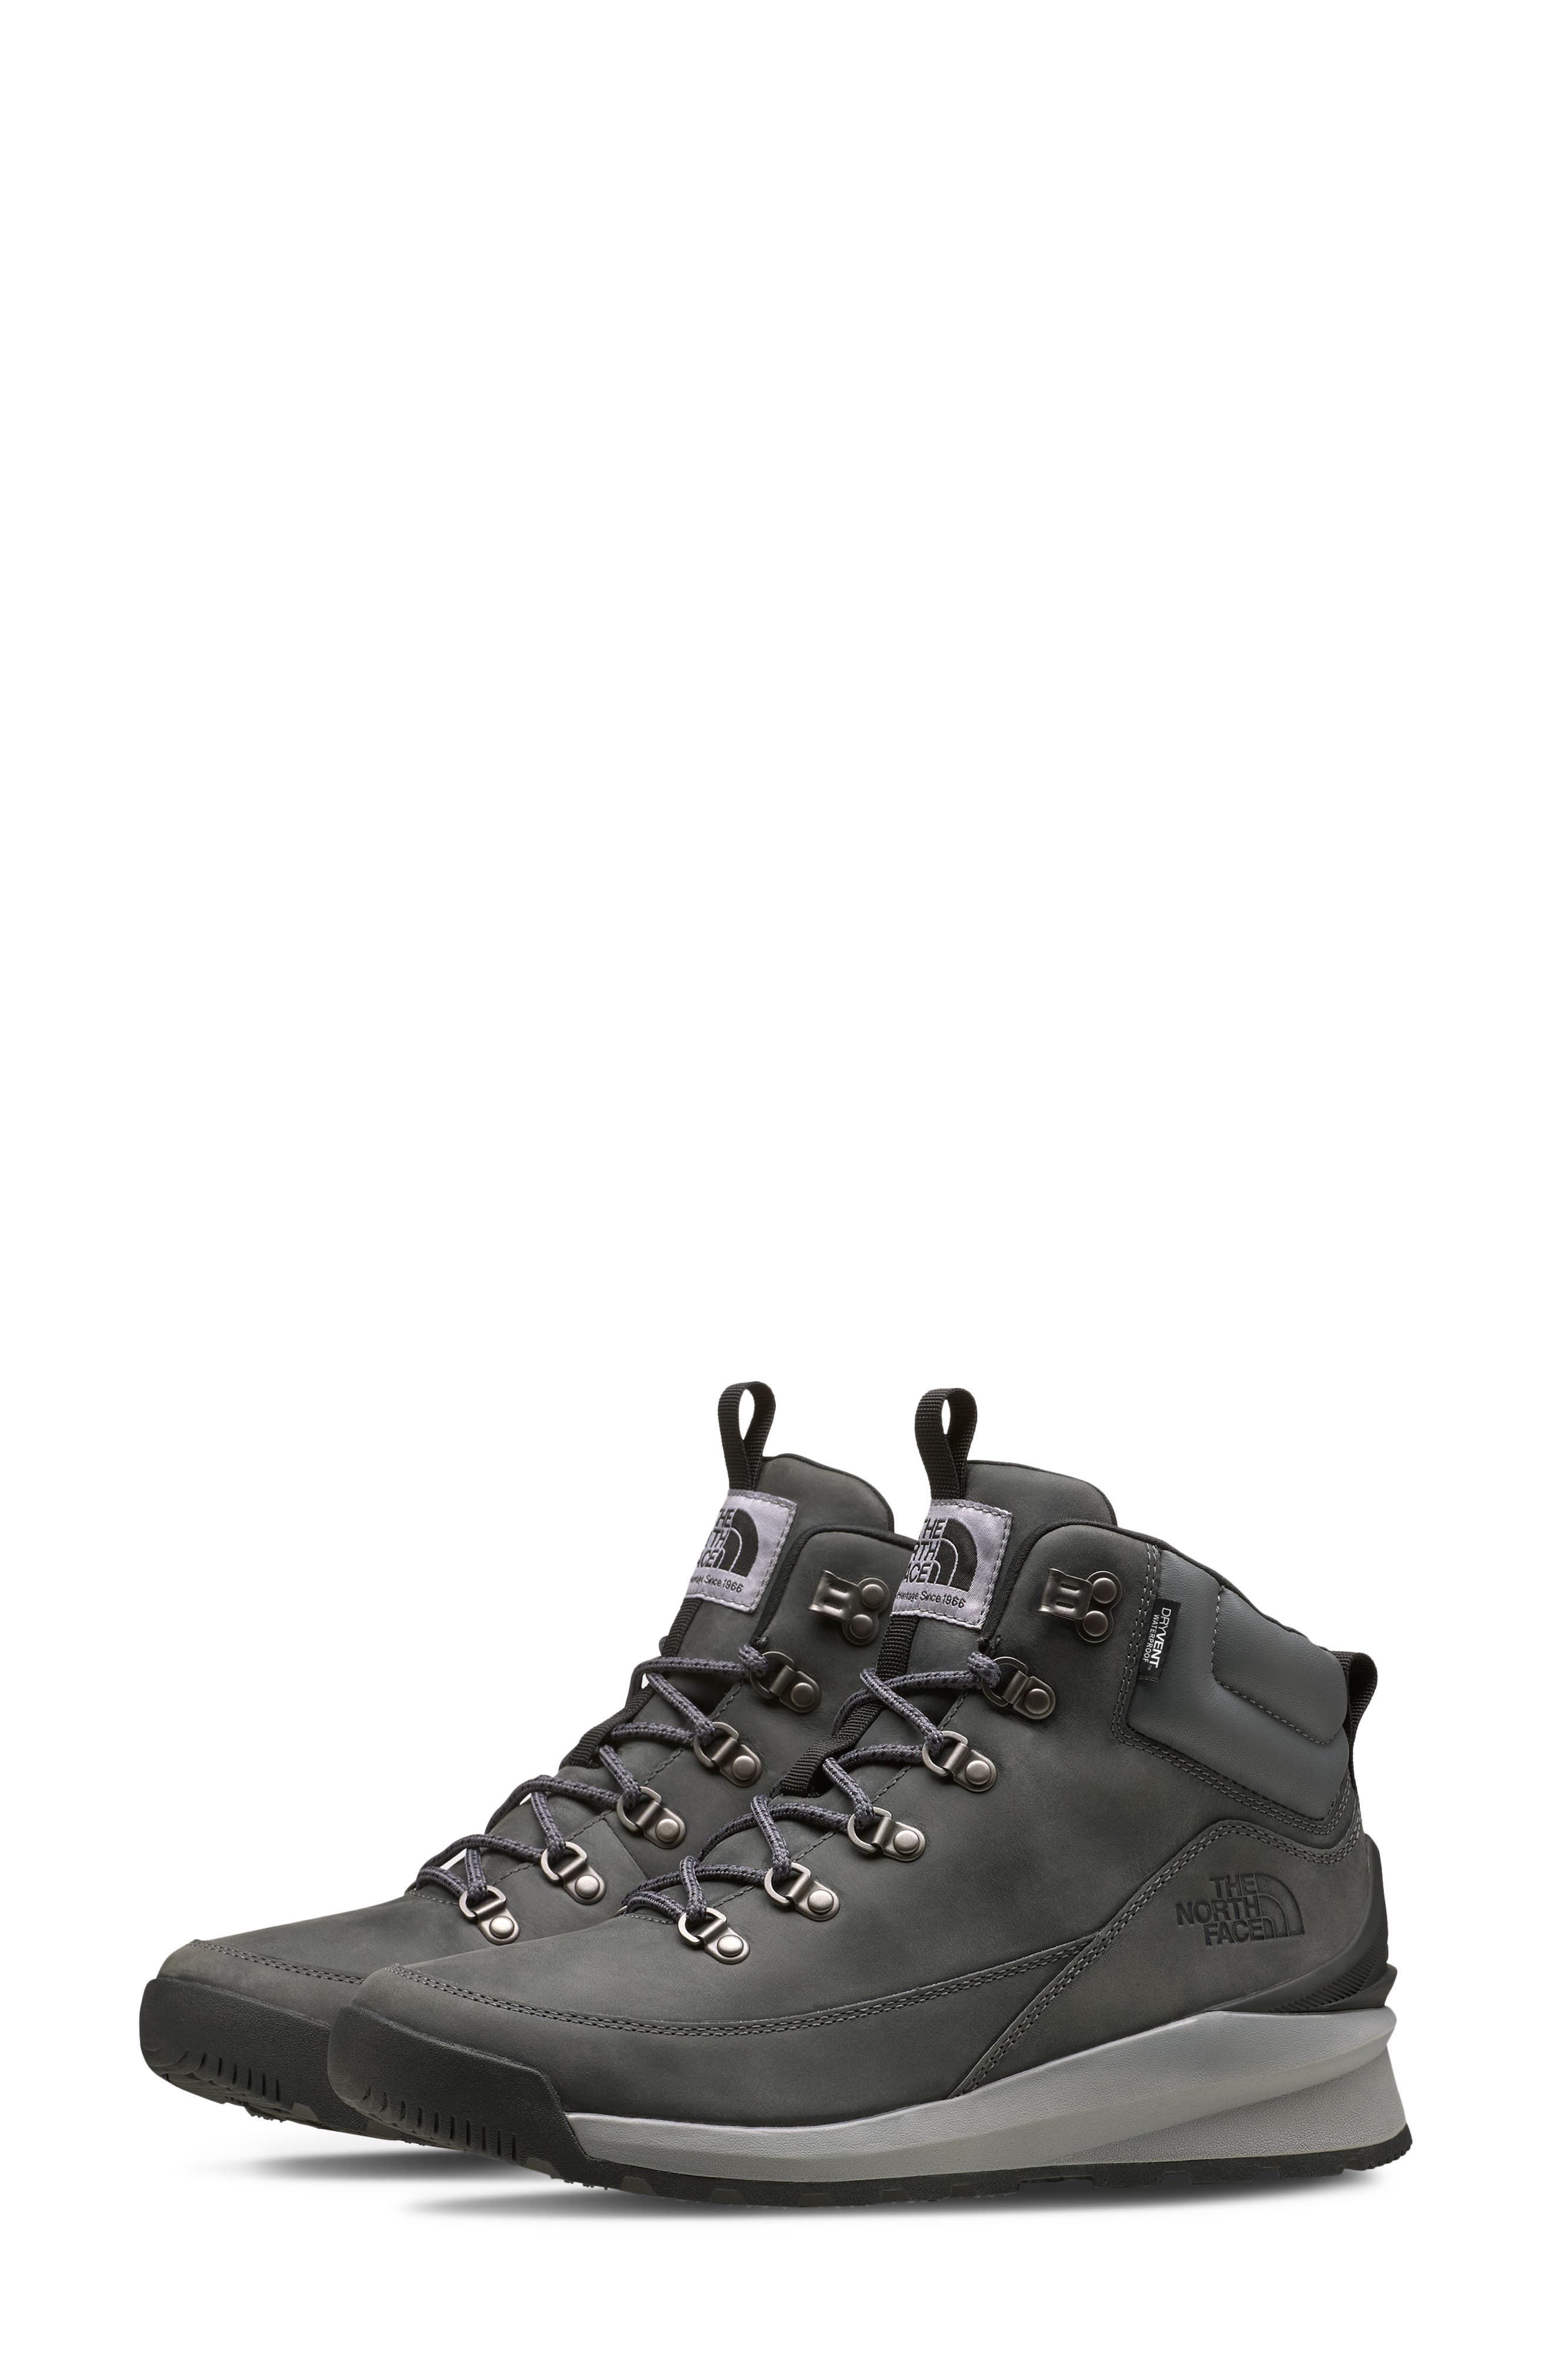 north face boots mens waterproof